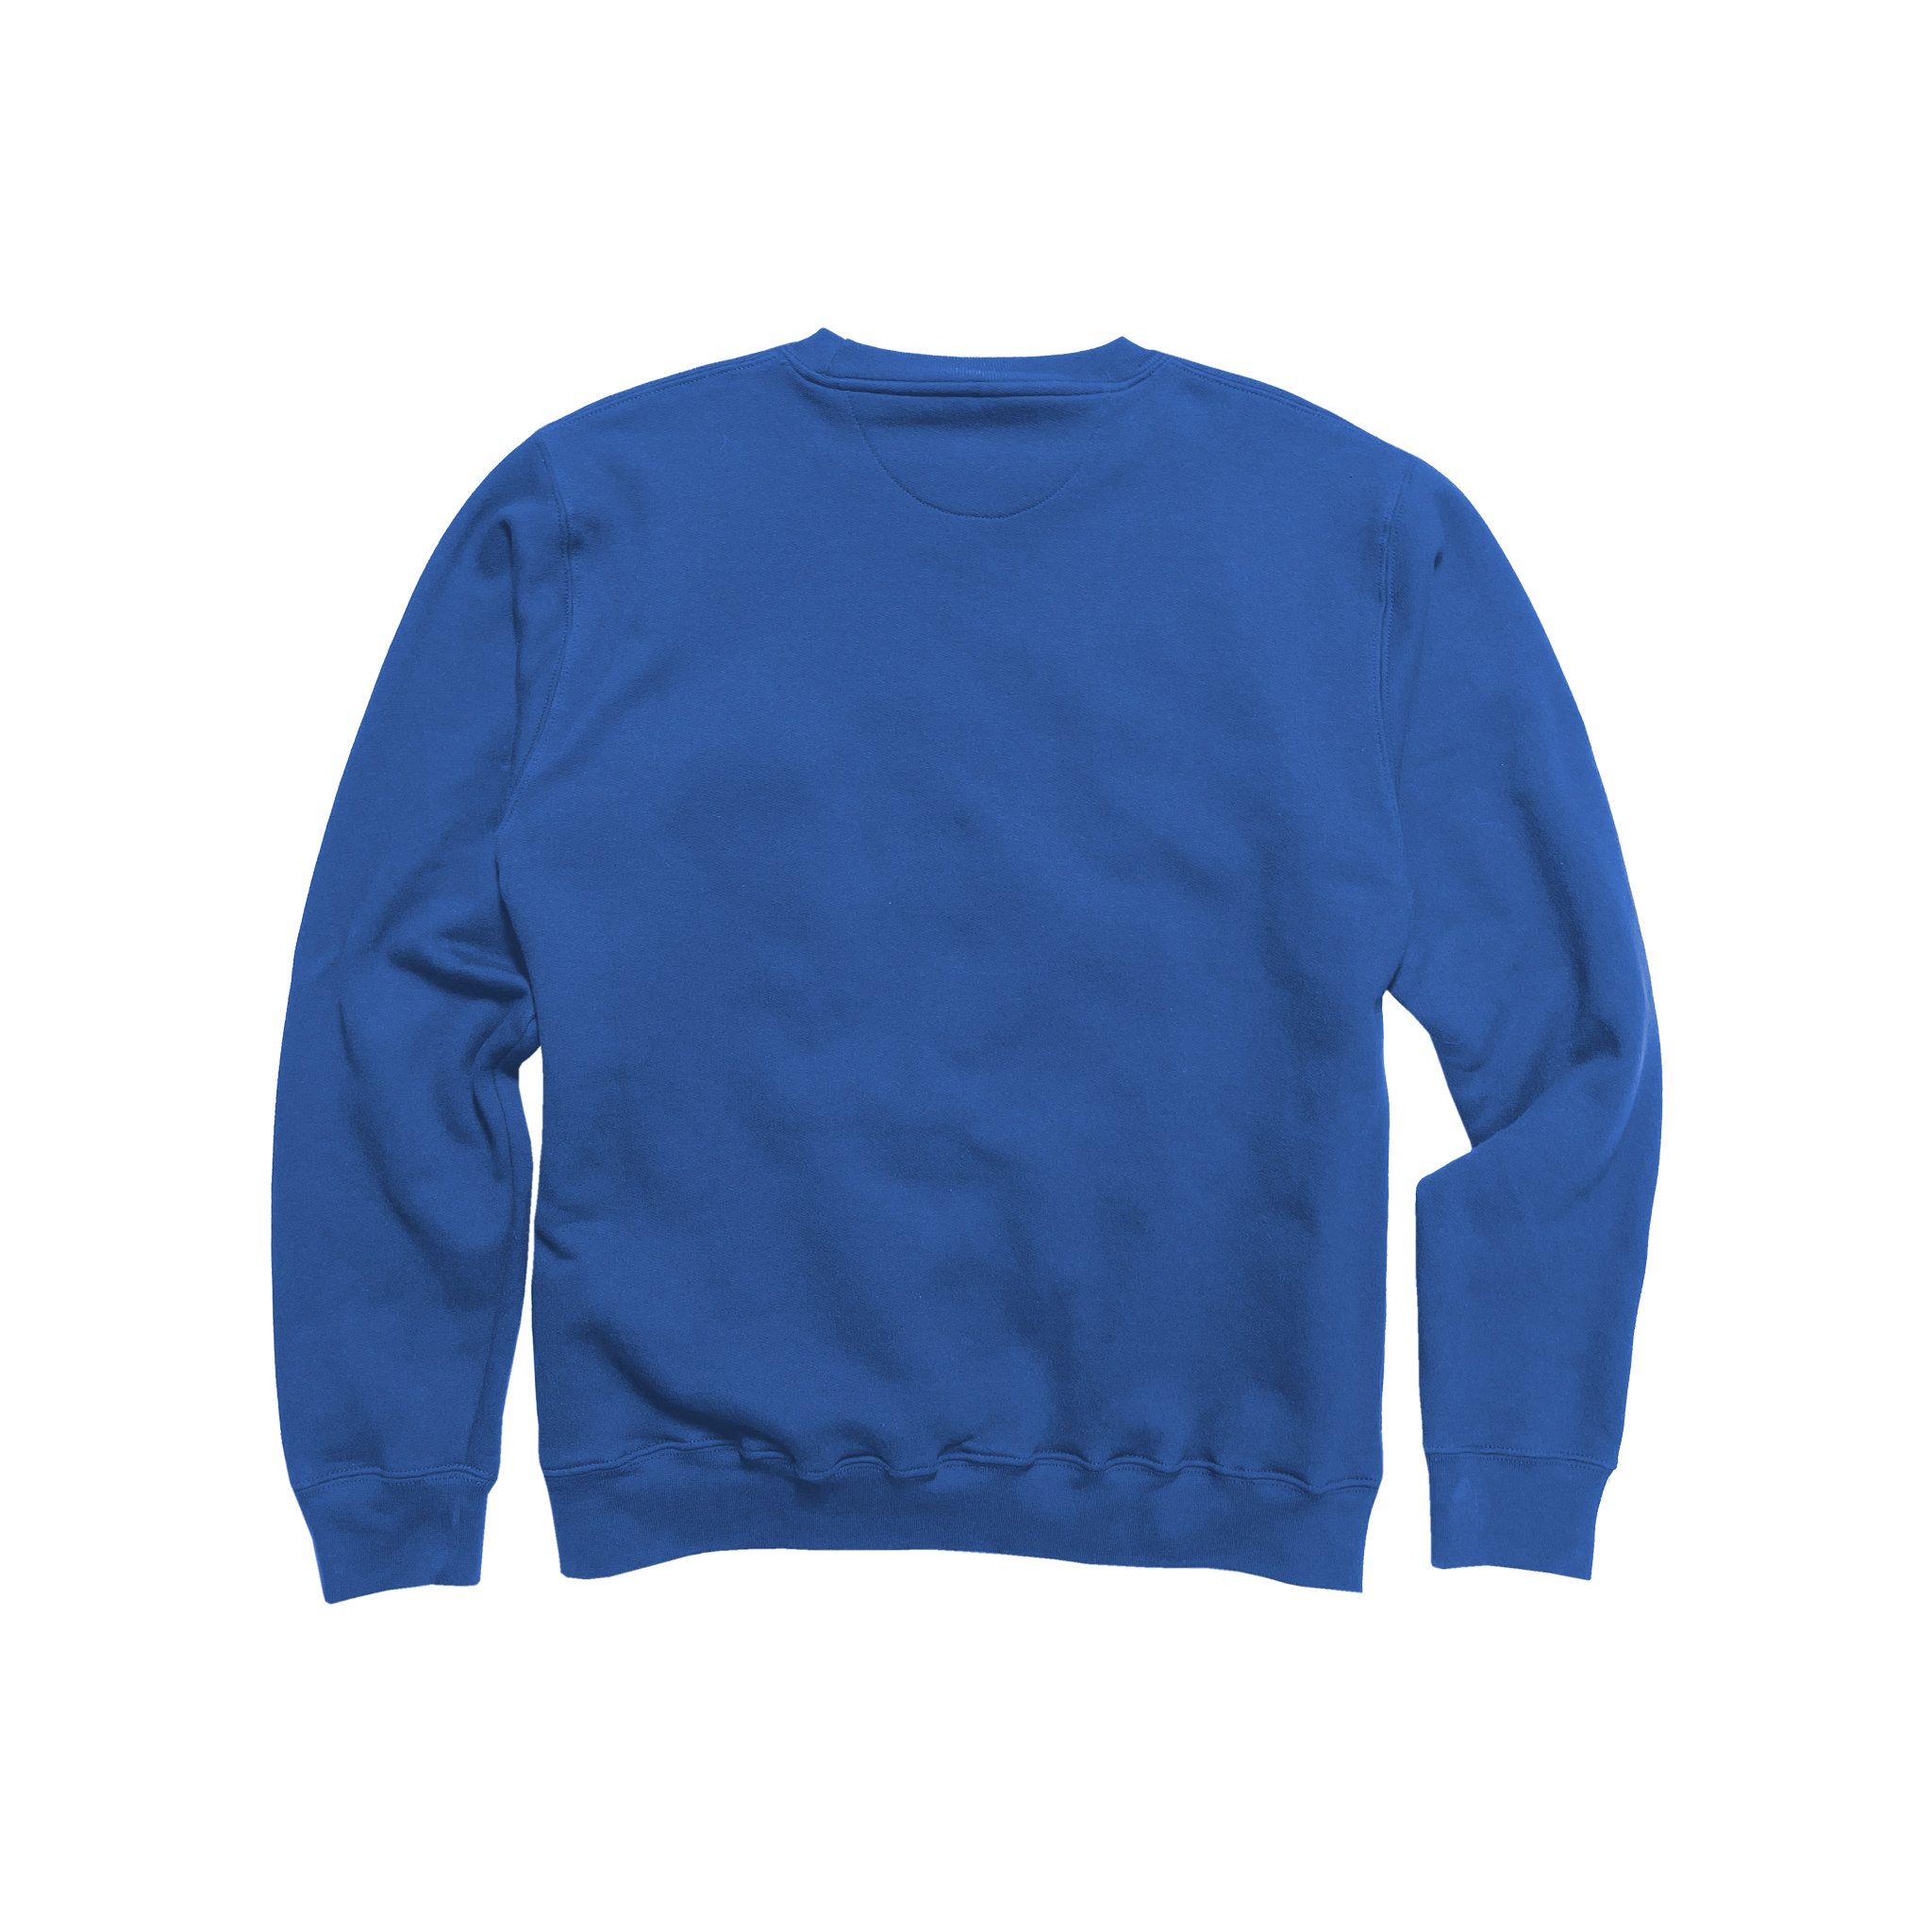 Back Flat Lay of GOEX Unisex and Men's Fleece Crew in Royal